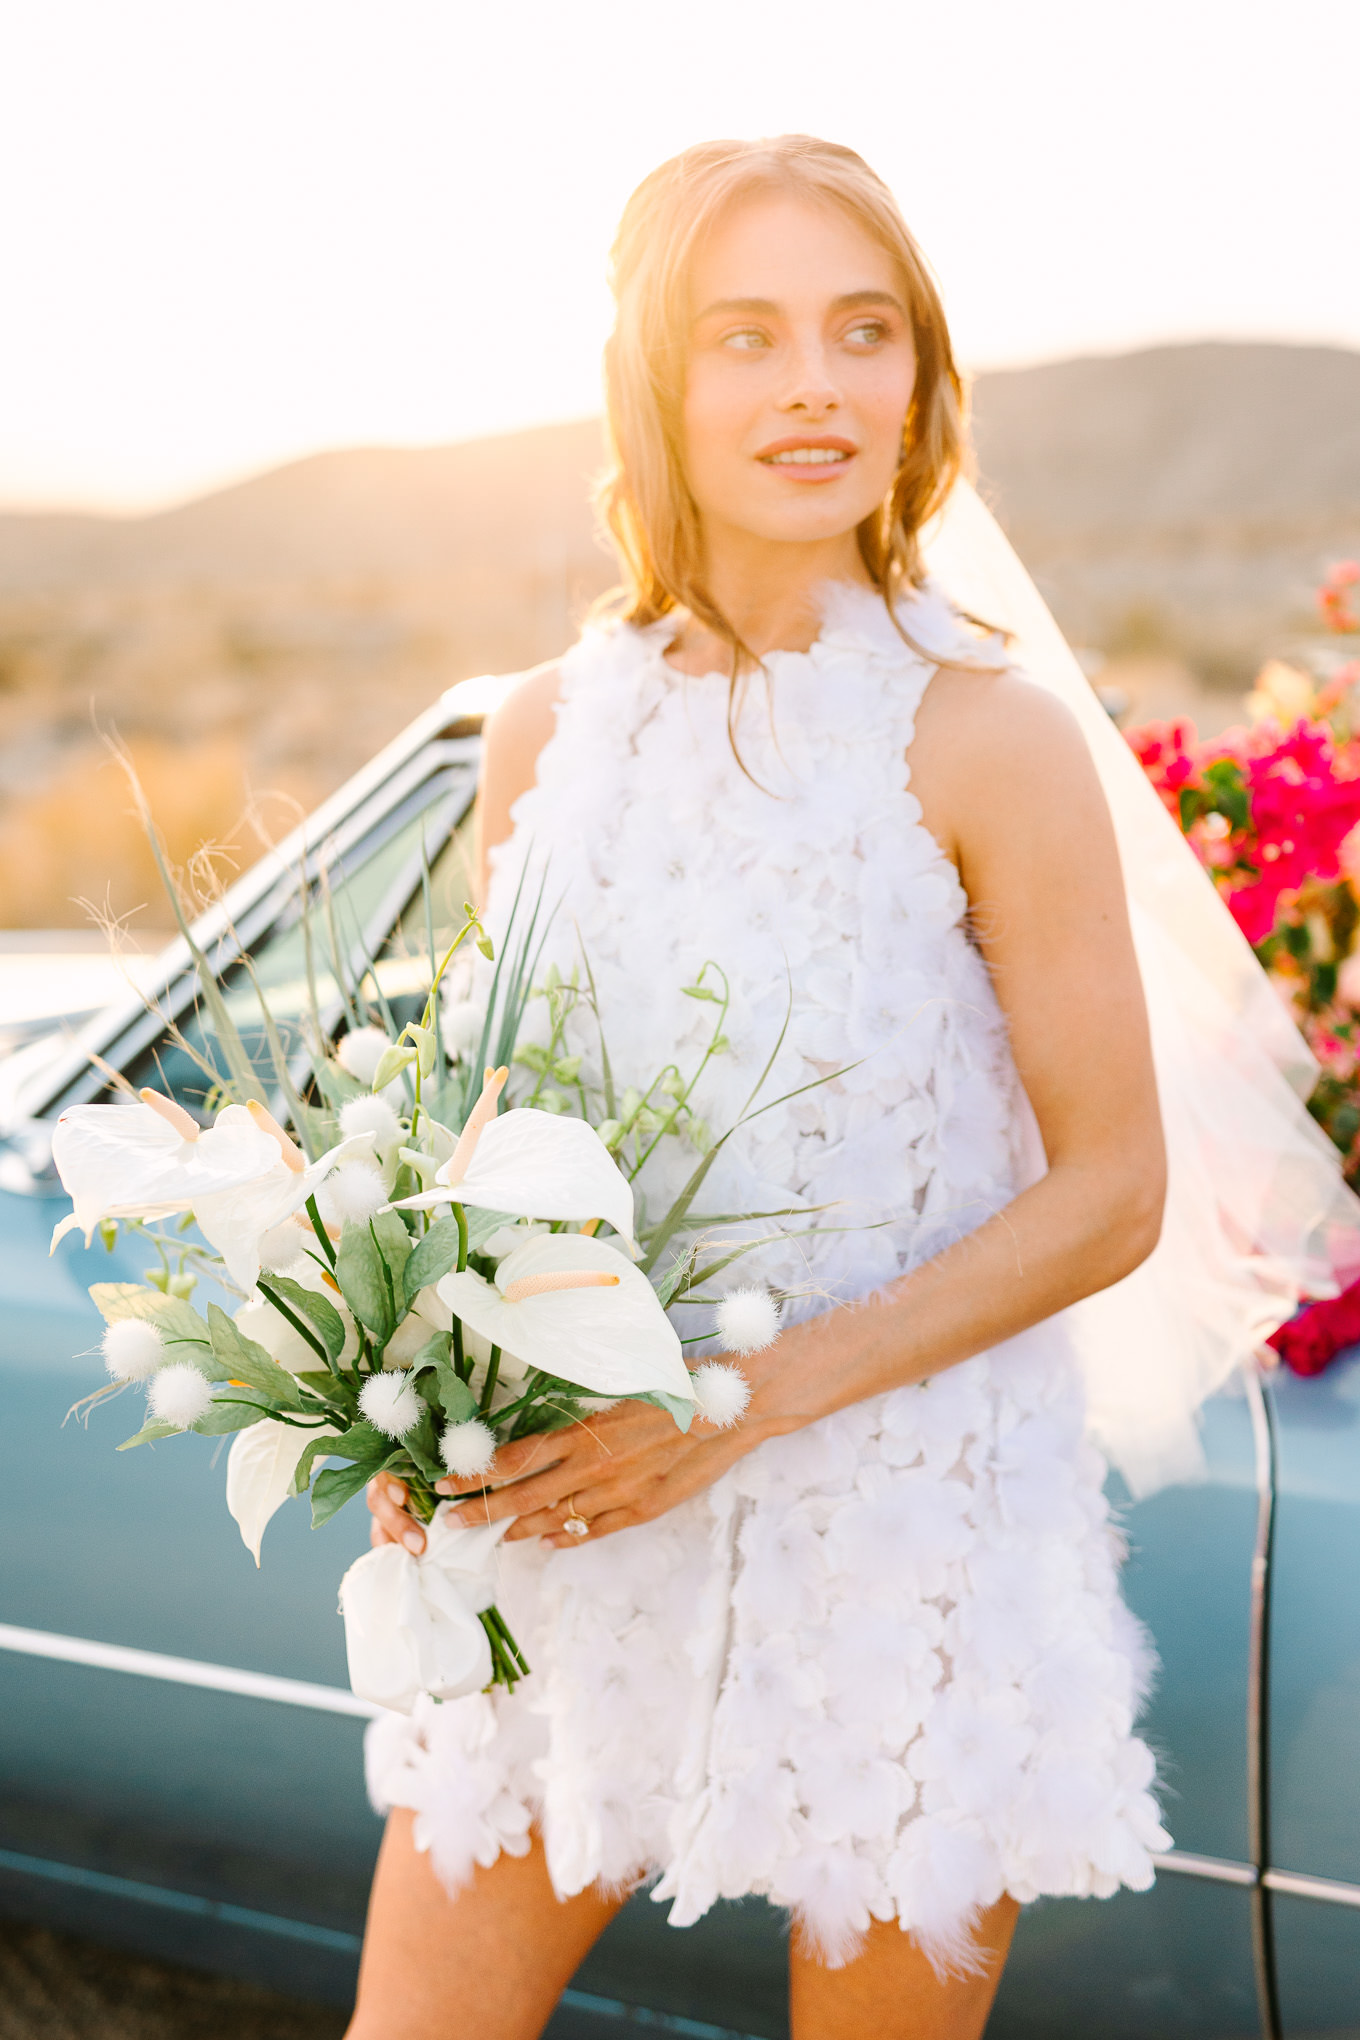 Colorful desert elopement bridal style with short Naeem Khan white dress and a blue classic car filled with flowers | Kindred Presets x Mary Costa Photography Palm Springs Ad Campaign | Colorful Palm Springs wedding photography | #palmspringsphotographer #lightroompresets #sandshotel #pinkhotel   Source: Mary Costa Photography | Los Angeles